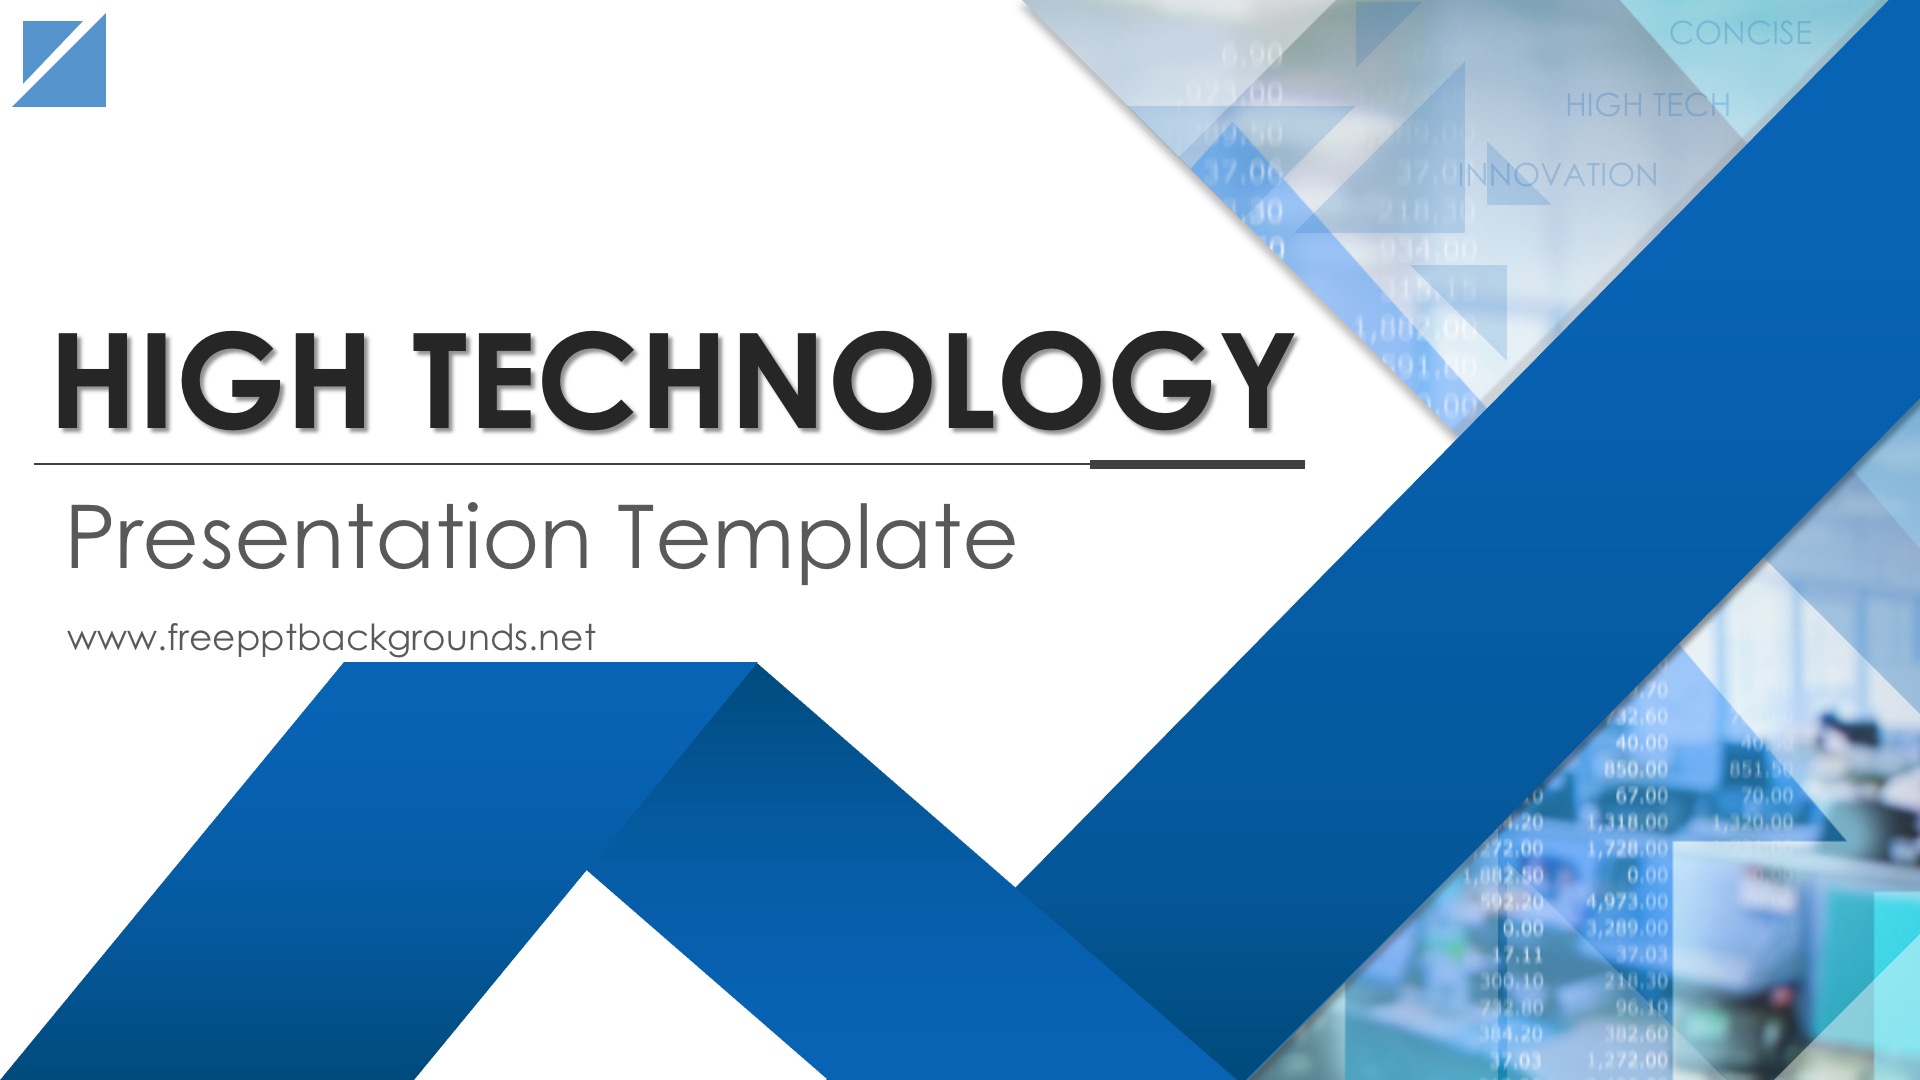 Powerpoint Templates For Technology Presentations